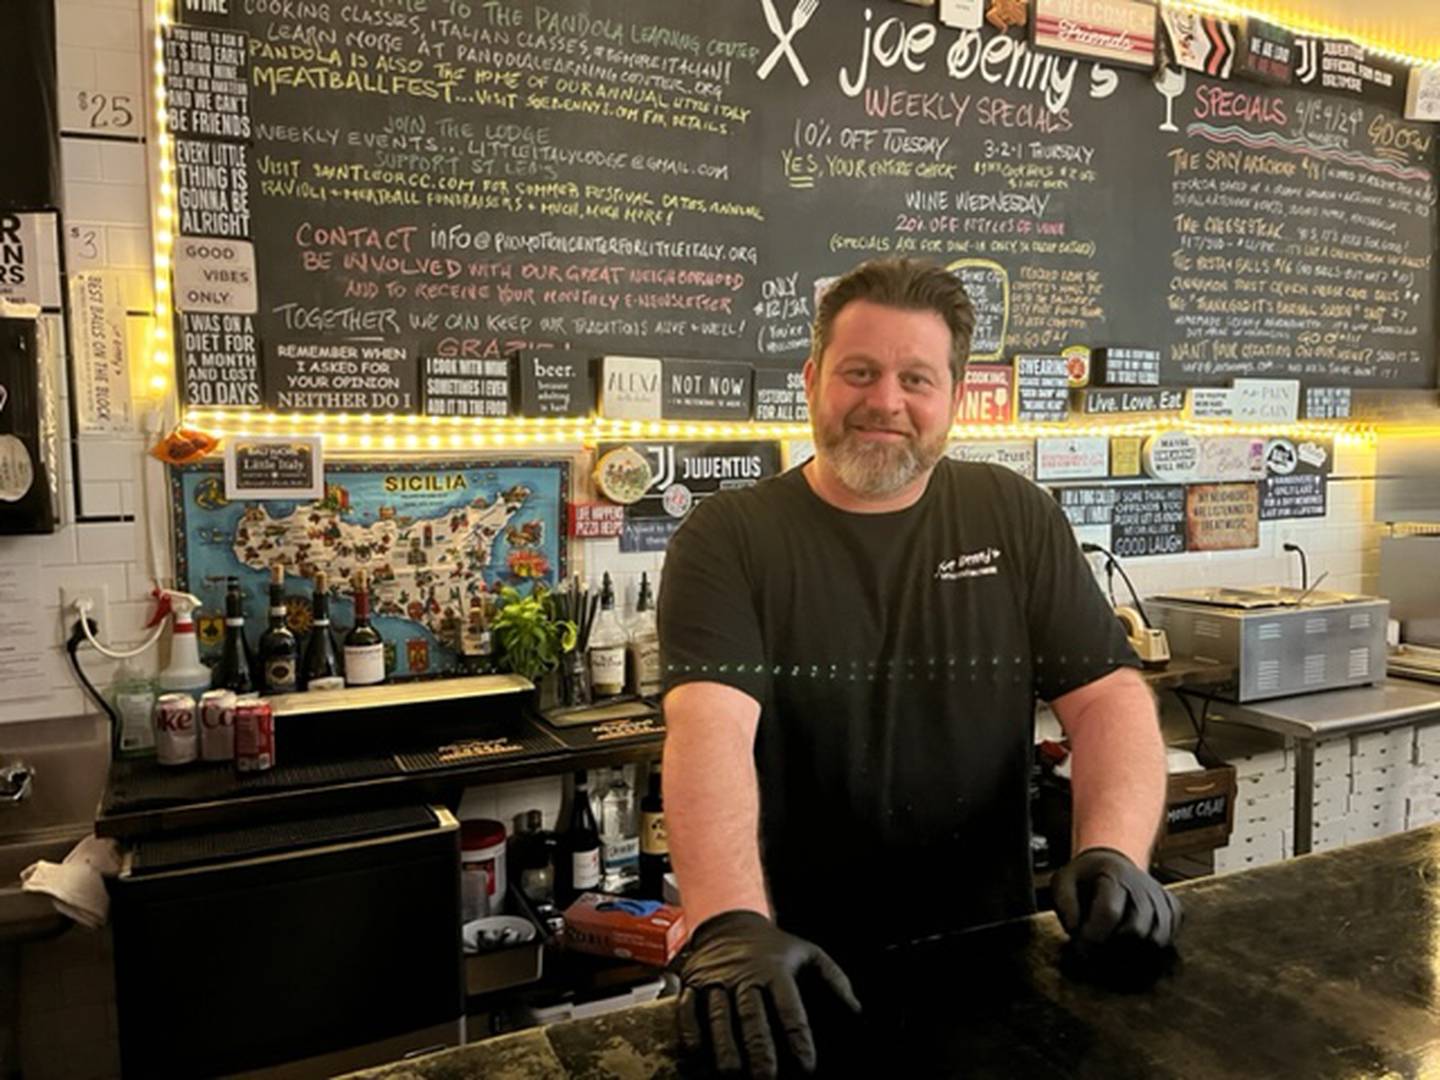 Joe Benny’s chef and owner Joseph Gardella stands behind the bar.